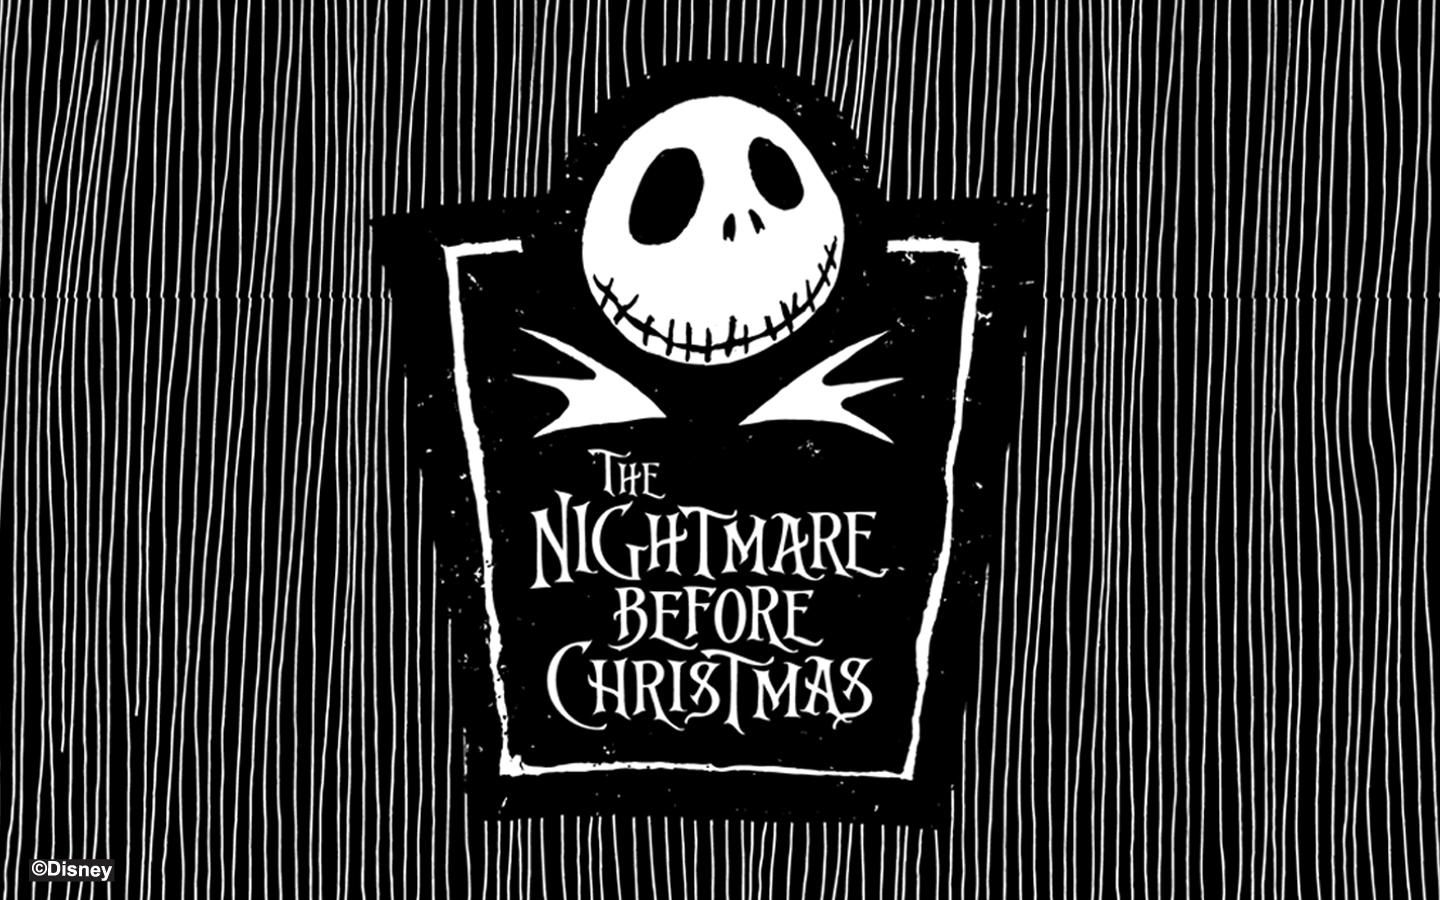 Image Gallery for The Nightmare Before Christmas - FilmAffinity